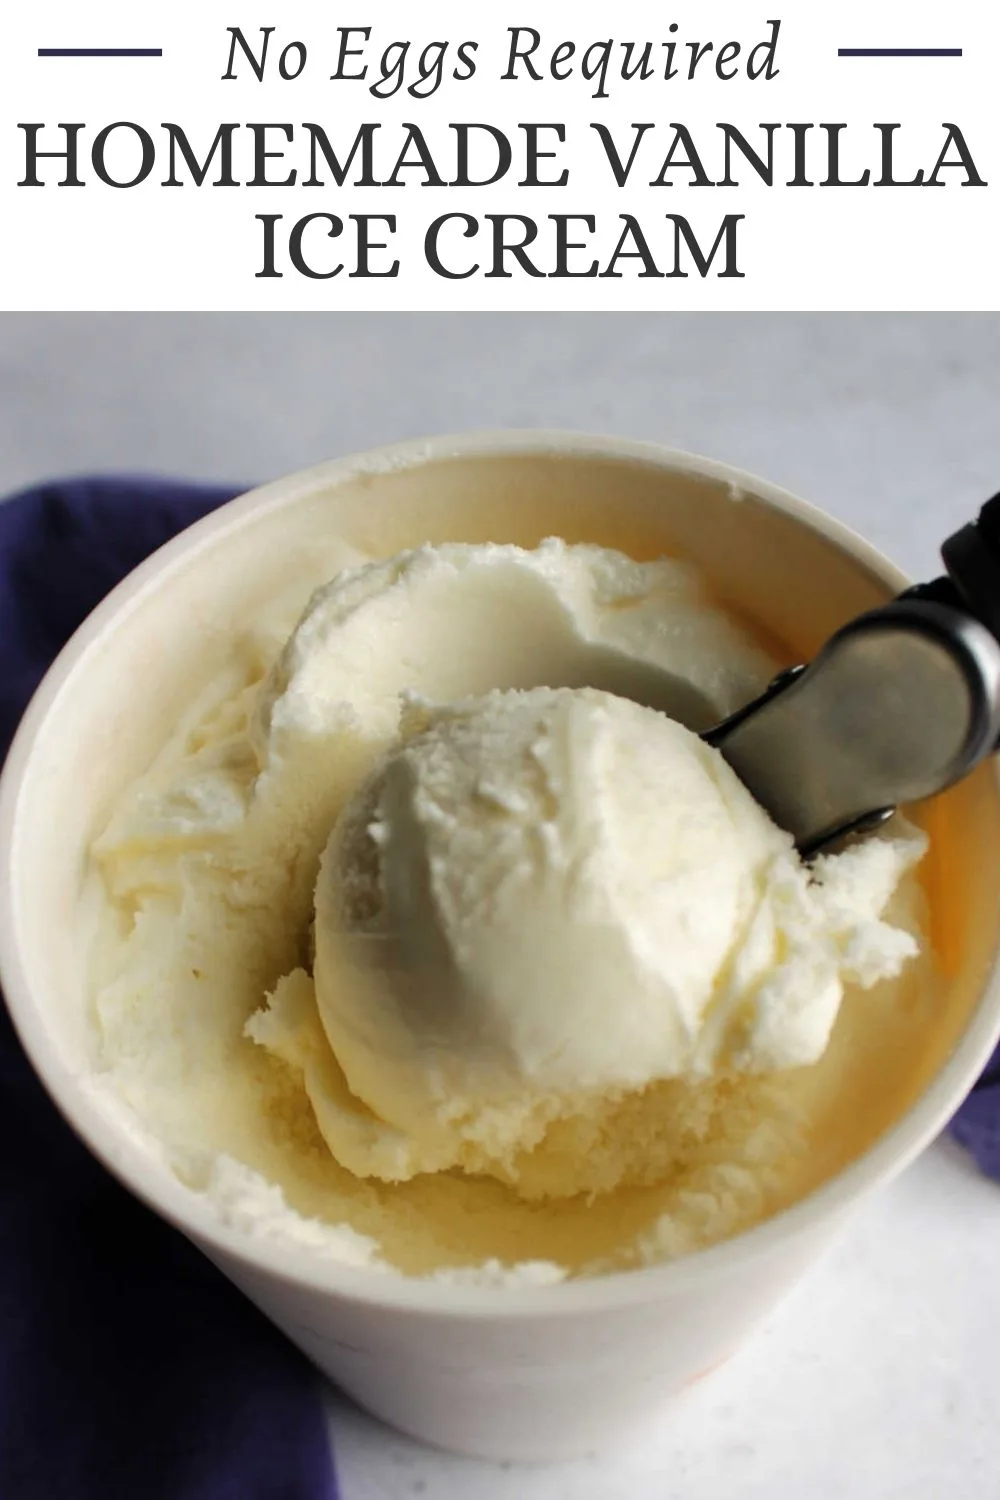 This creamy delicious homemade vanilla ice cream could not be easier to make. This egg free recipe makes getting the base in the churner fast and the results are smooth and tasty.